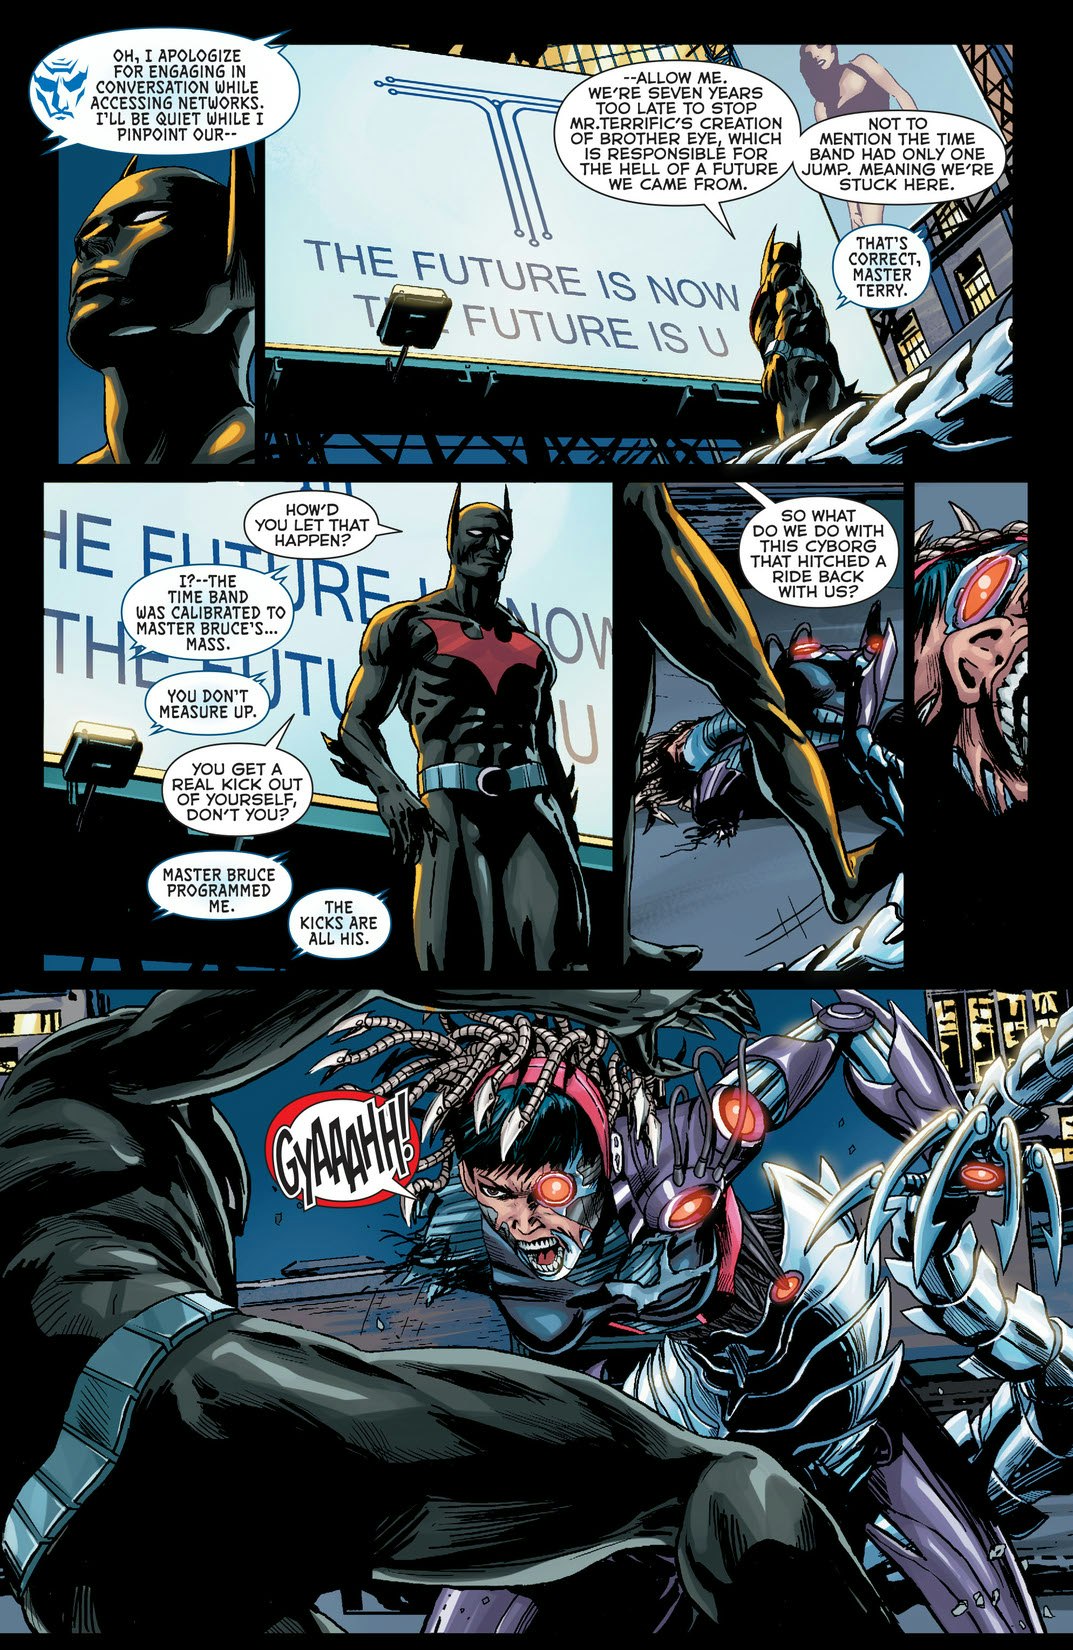 The New 52: Futures End #1